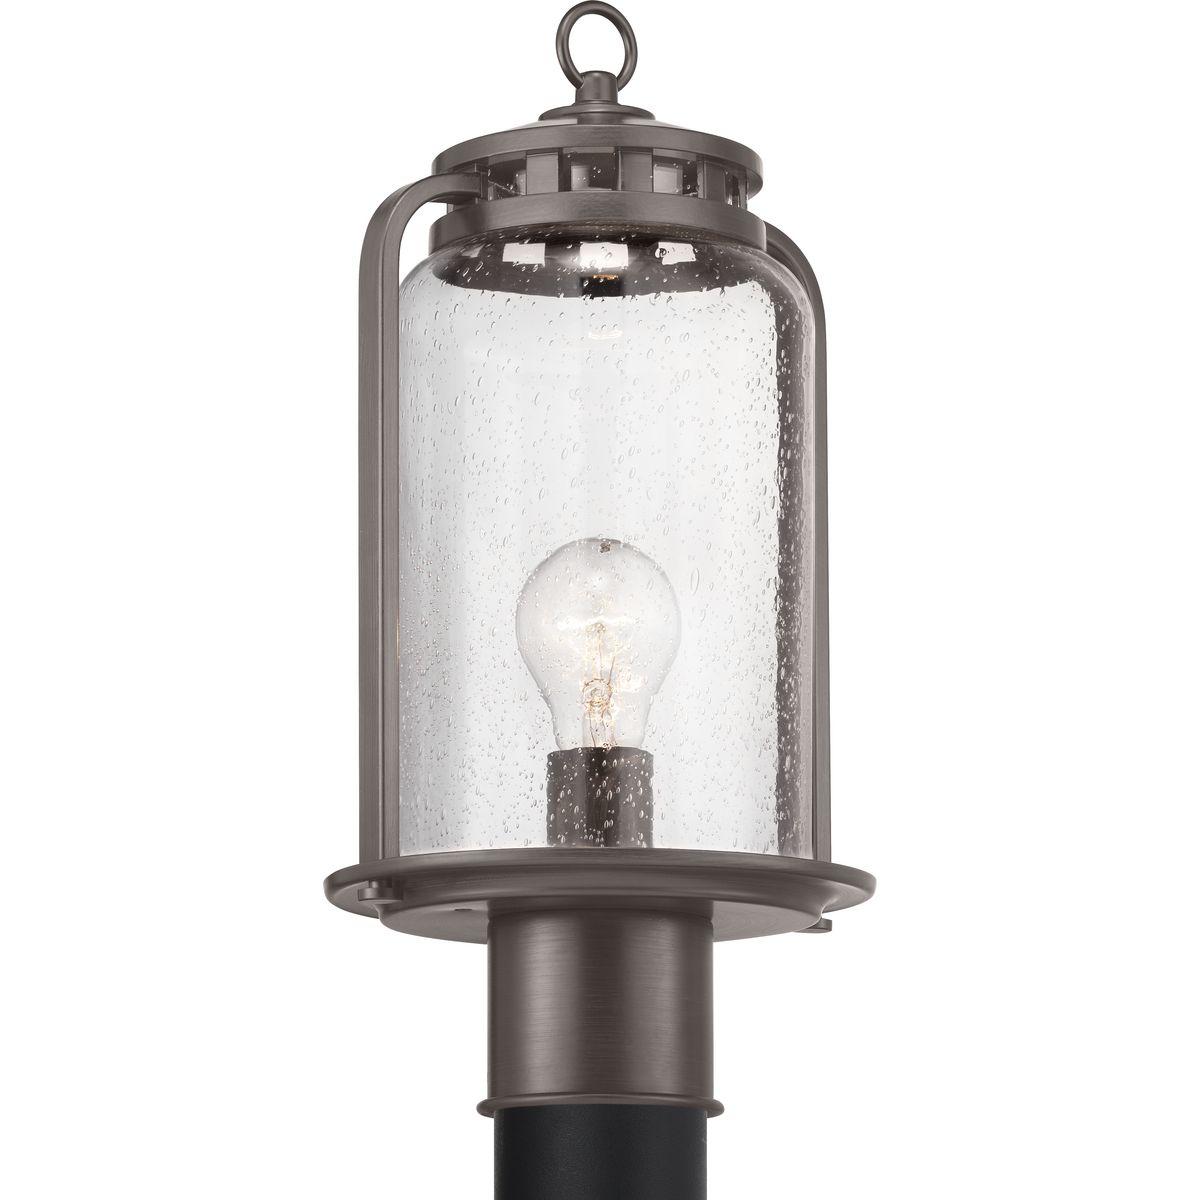 Hubbell P6436-20 Provide a casual, rustic feel with a vintage flair to your home's interior or exterior spaces with this post lantern. Finely crafted metal accents create a light-house inspired design with an antique bronze frame. The frame holds a clear seeded glass shad